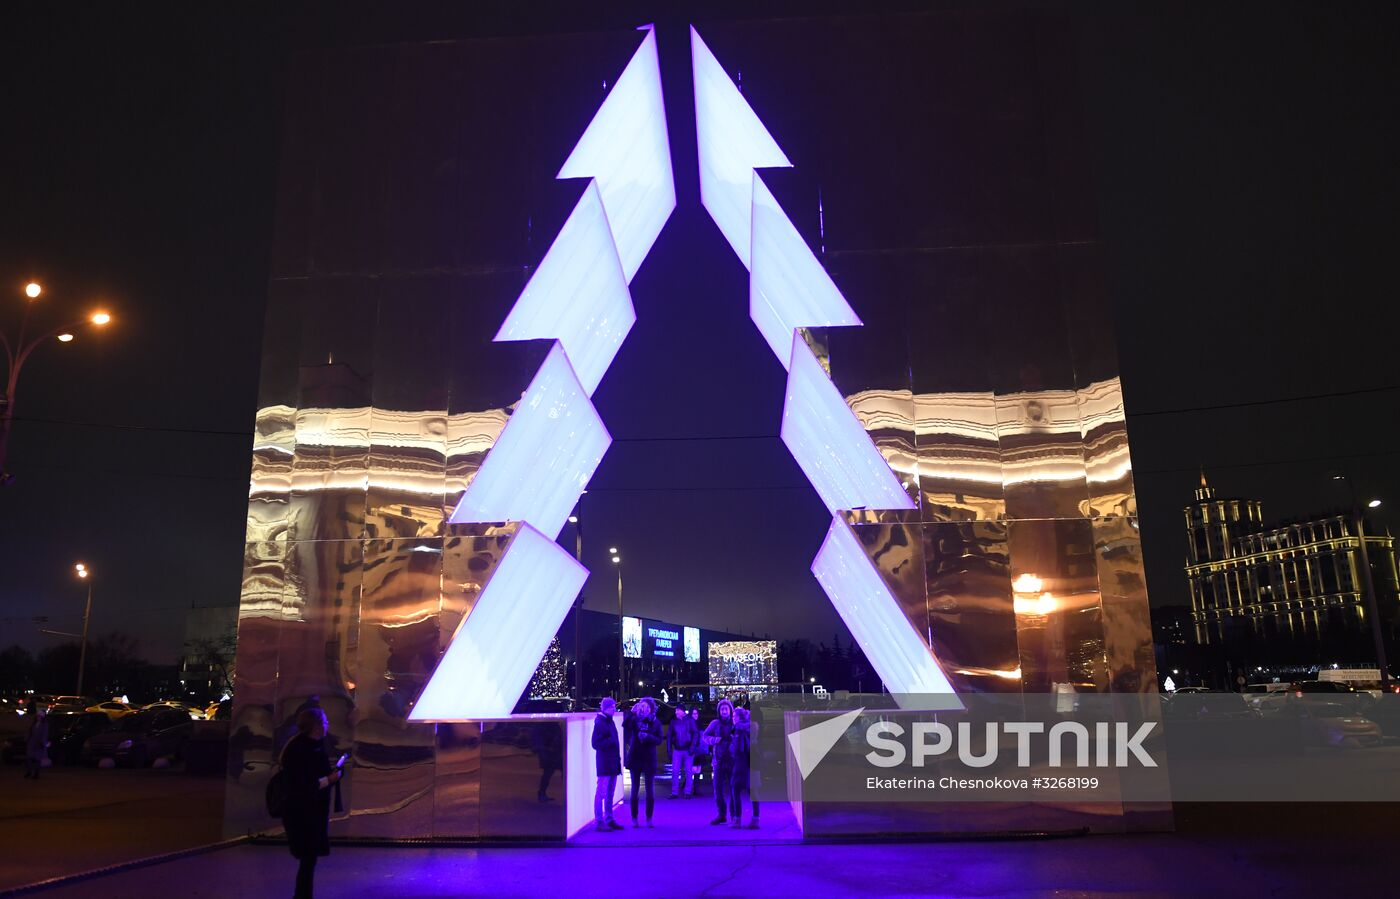 Opening of Christmas Tree festivities across from main entrance to Gorky Park